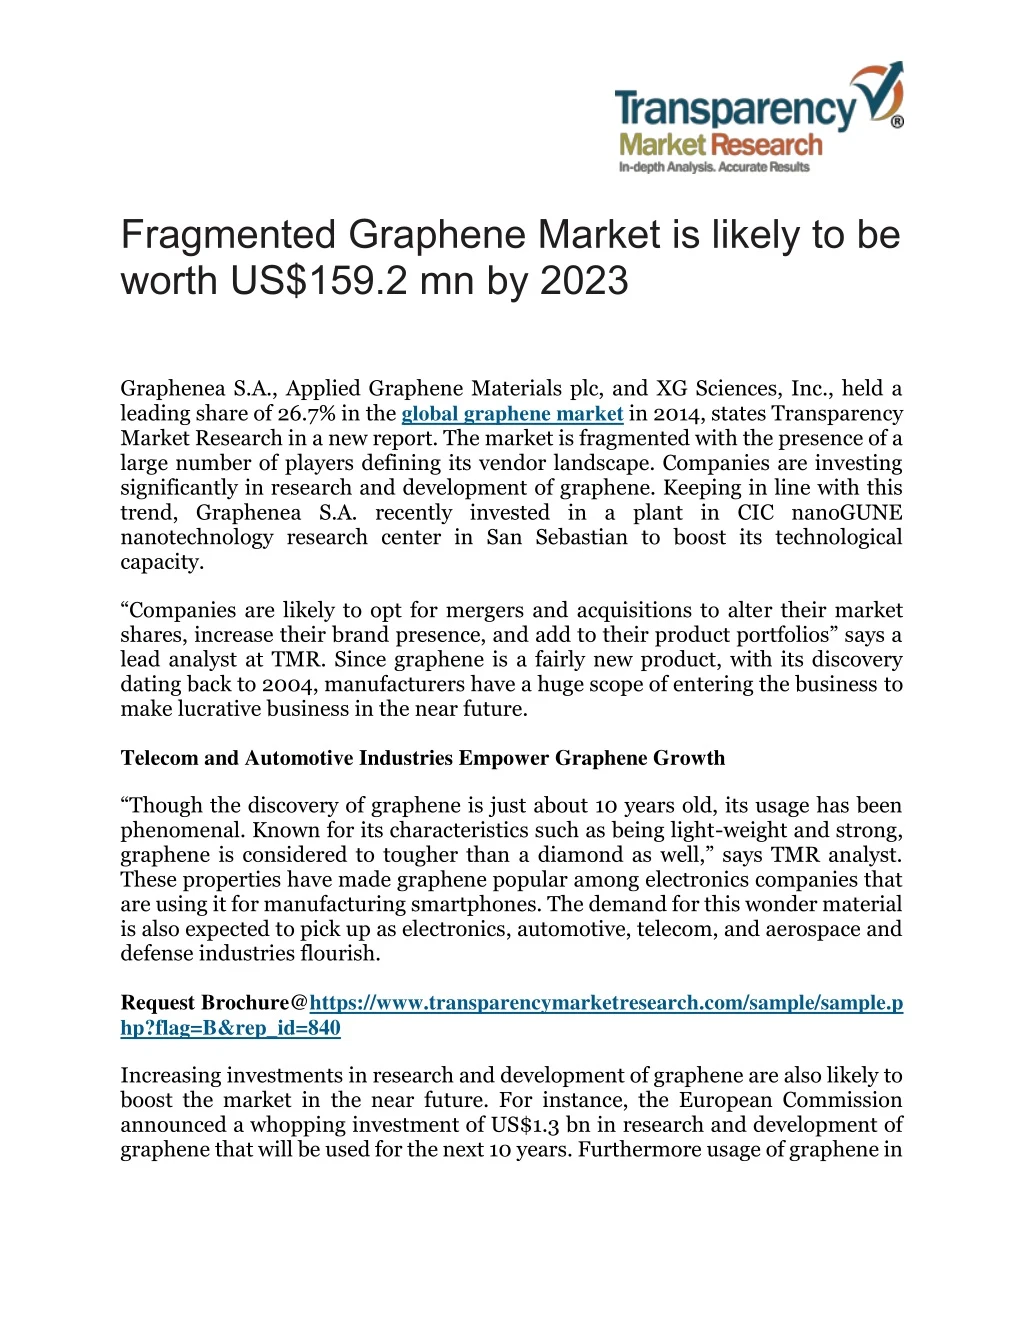 fragmented graphene market is likely to be worth